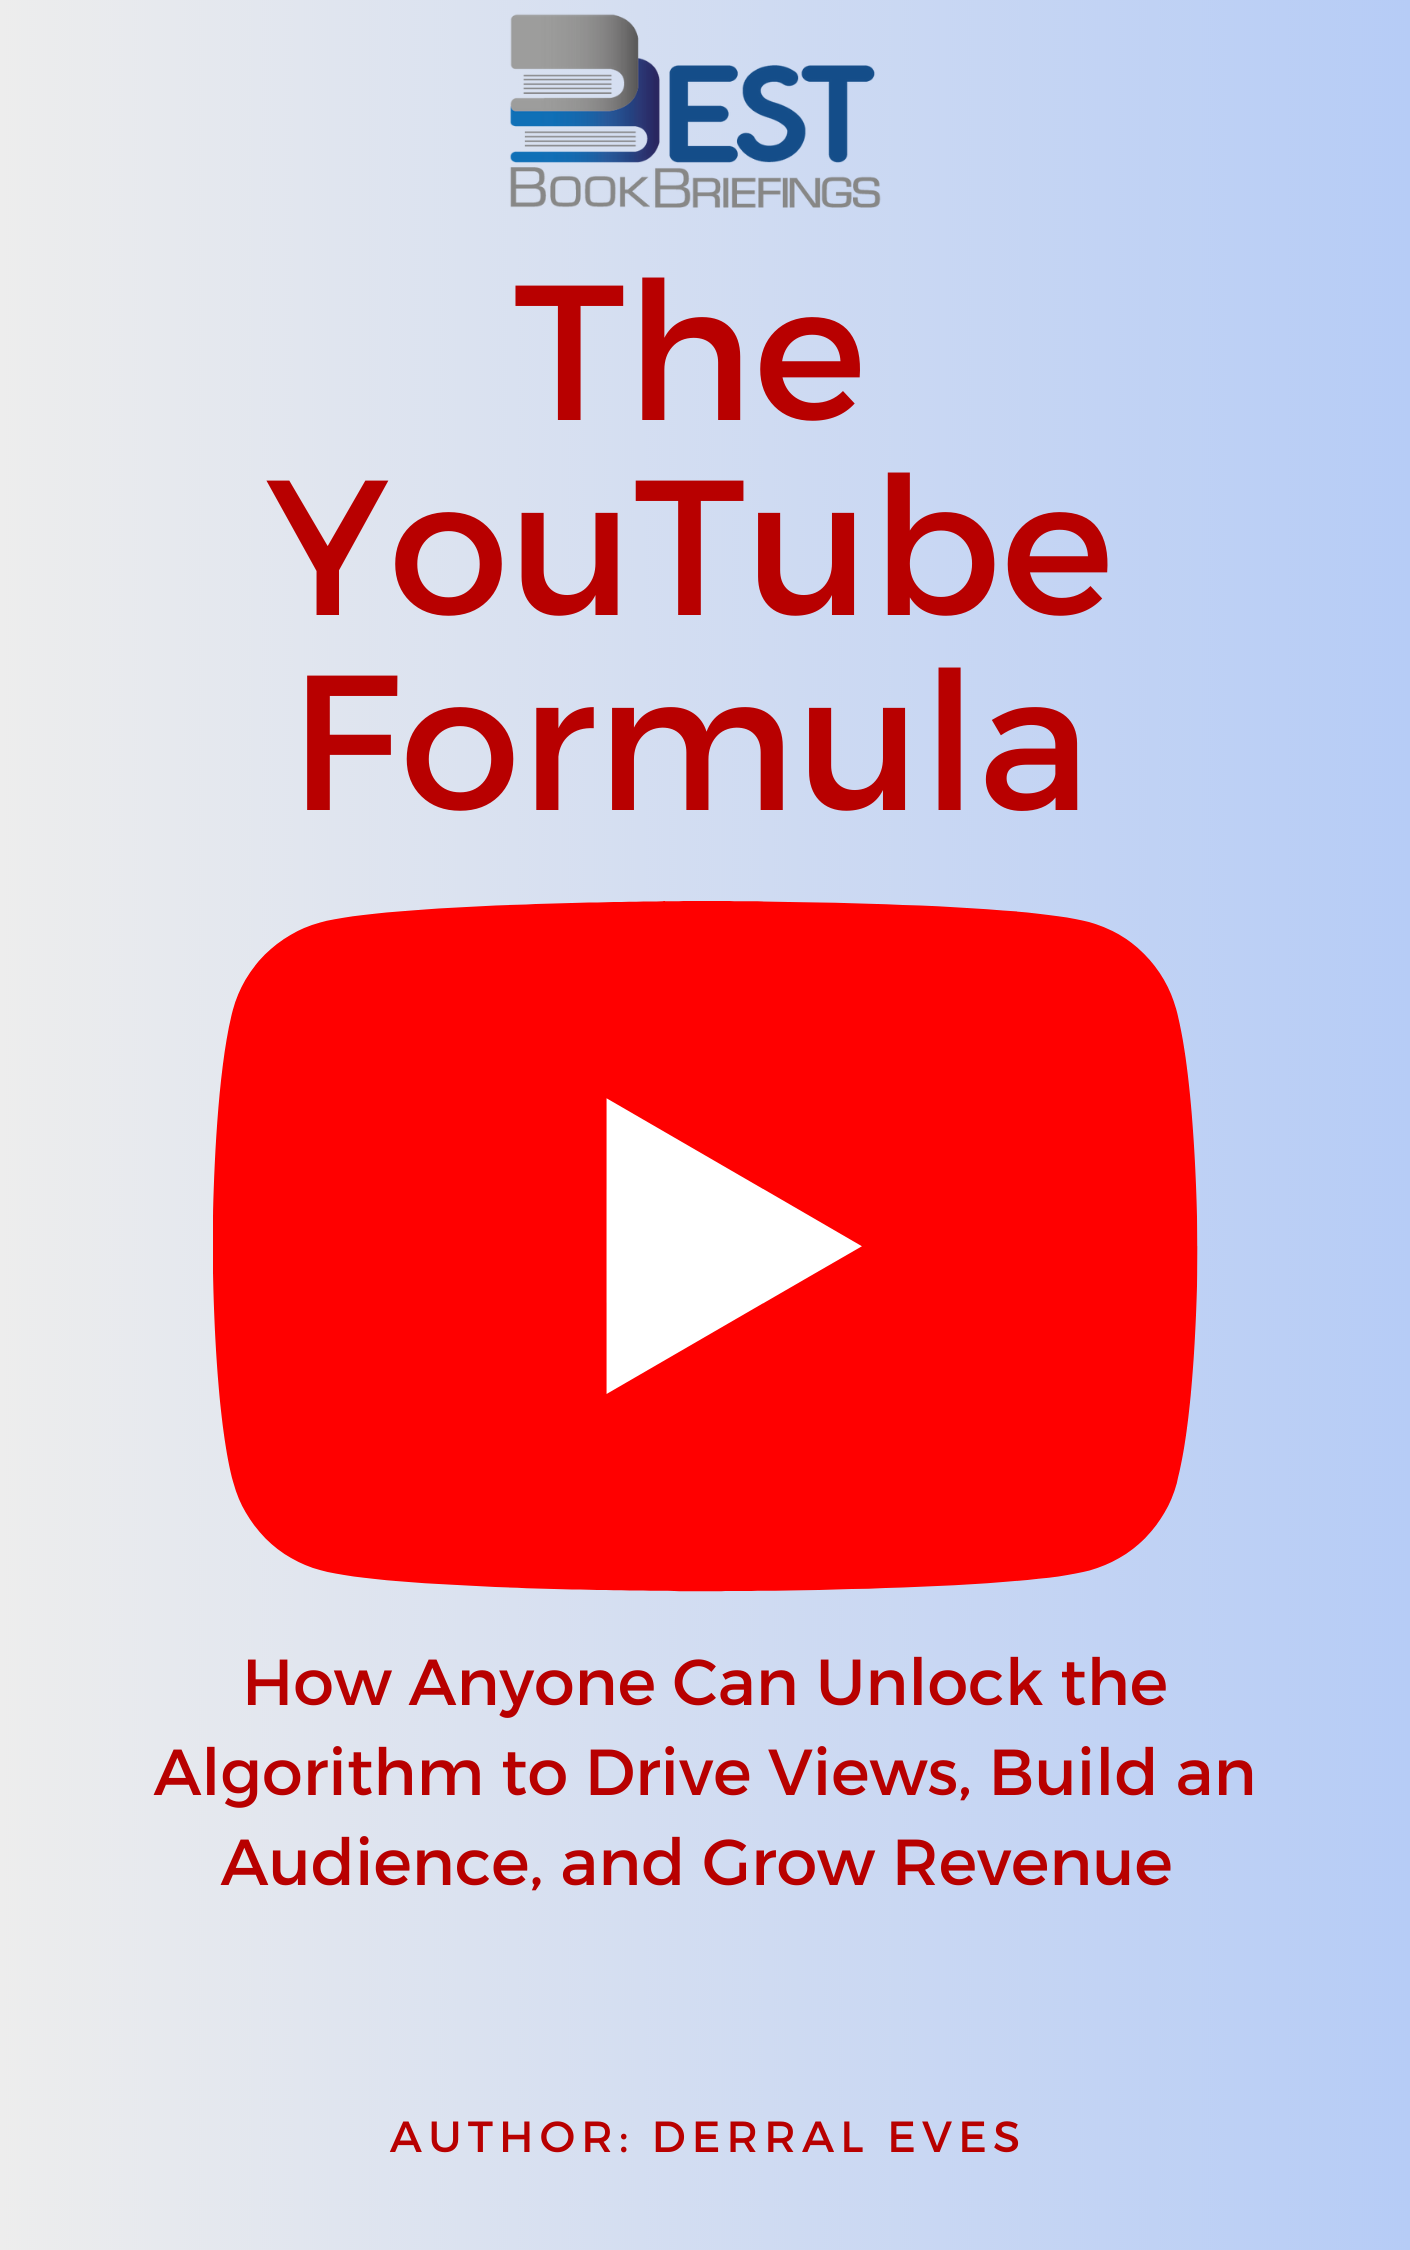 Derral Eves has generated over 60 billion views on YouTube and helped 24 channels grow to one million subscribers from zero. In The YouTube Formula: How Anyone Can Unlock the Algorithm to Drive Views, Build an Audience, and Grow Revenue, the owner of the largest YouTube how-to channel provides the secrets to 